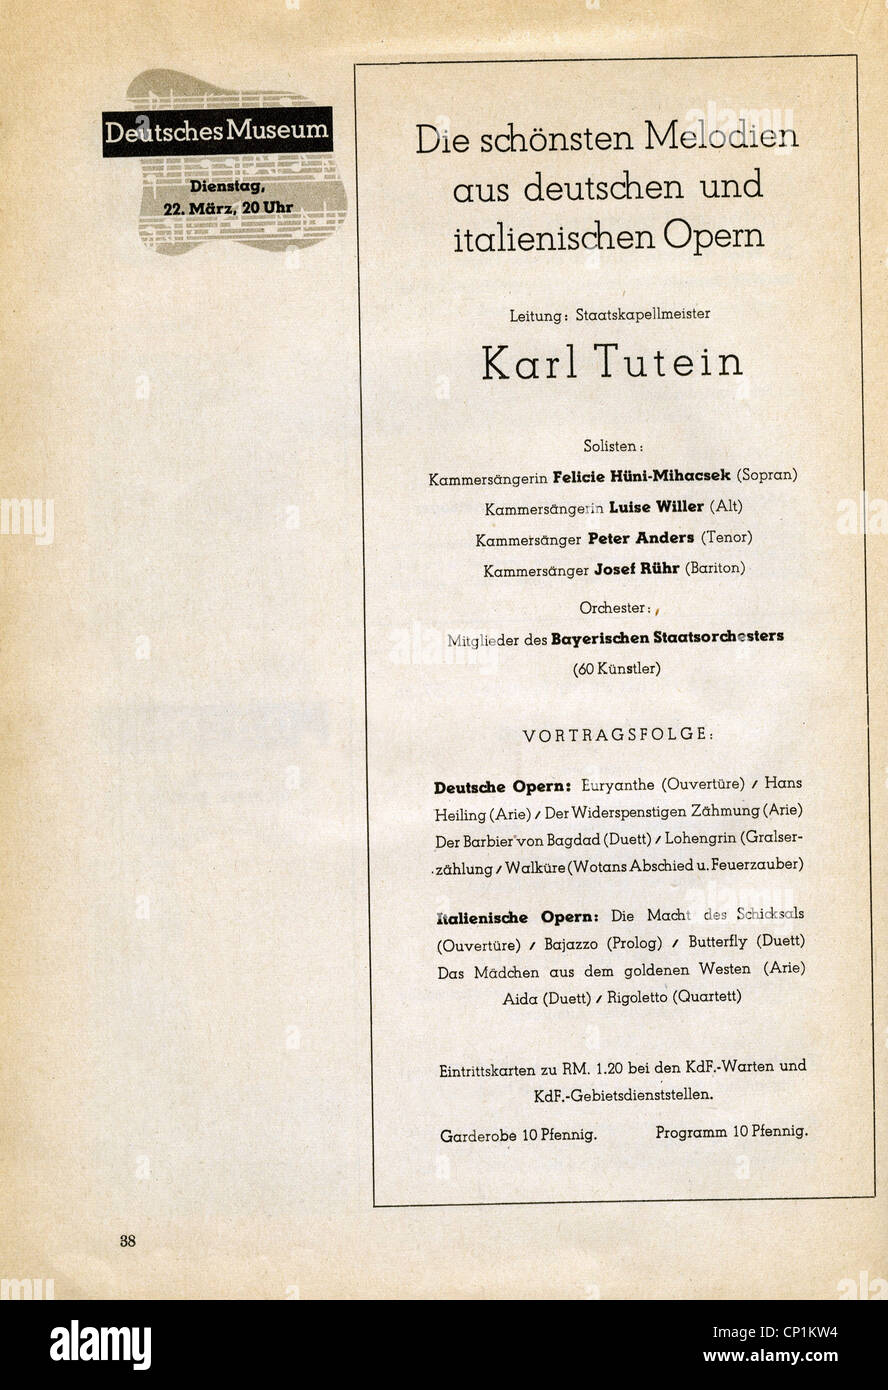 Nazism / National Socialism, organisations, 'Kraft durch Freude' ('Strength through Joy', KdF), concerts, chamber music, conductor Karl Tutein, Munich, advert, magazine of Gau Munich Upper Bavaria, March 1938, Additional-Rights-Clearences-Not Available Stock Photo